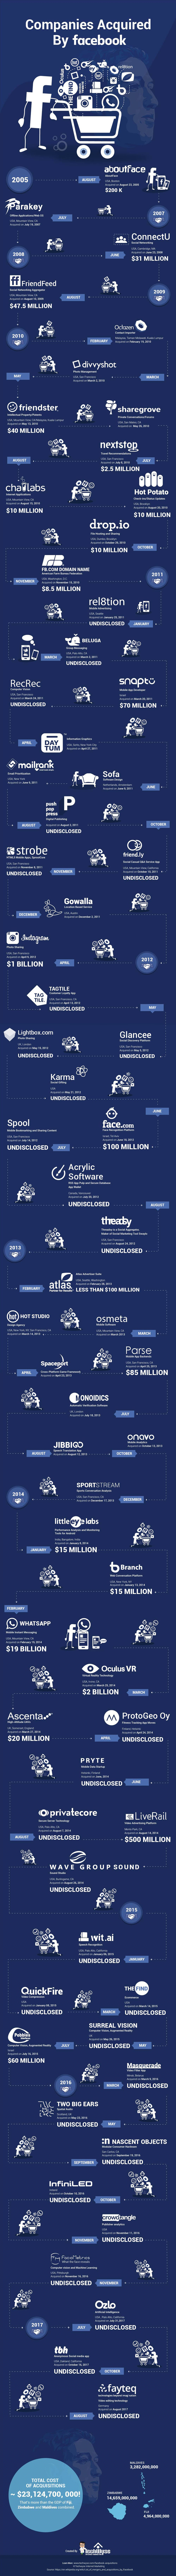 Companies-Acquired-by-Facebook-5-1-2018.jpg